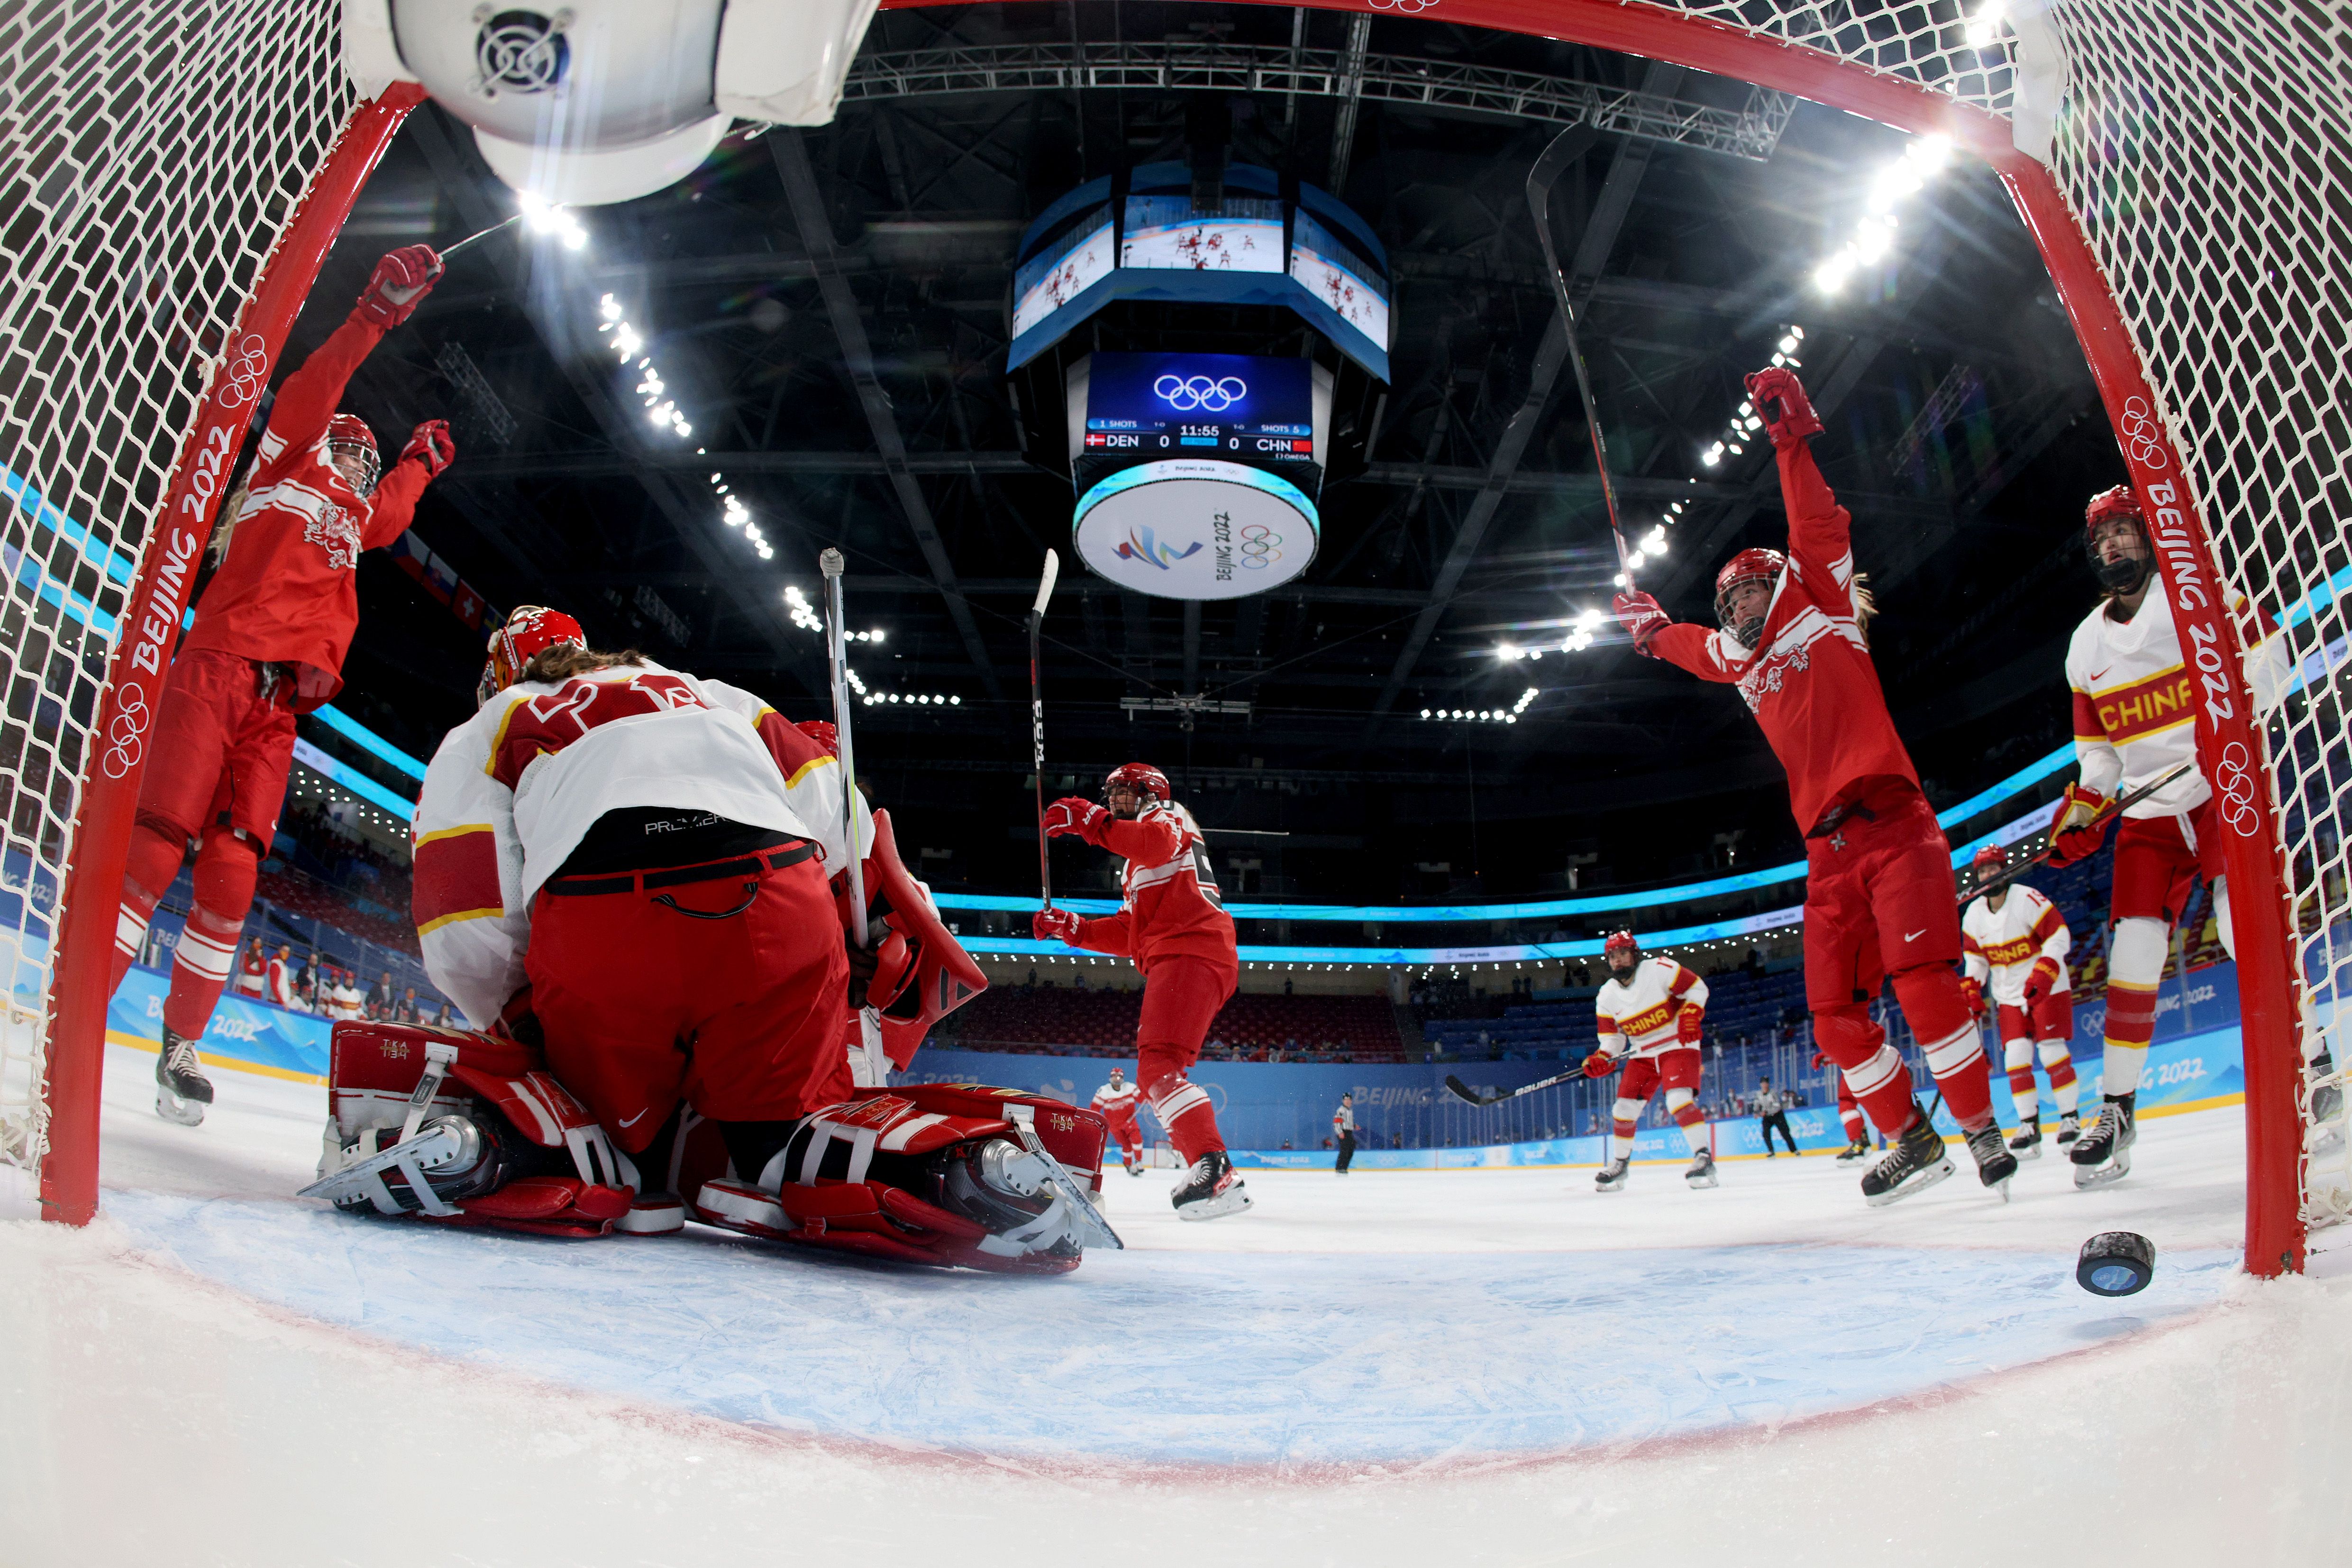 : Malene Frandsen #89 of Team Denmark celebrates a goal in the first period during their Women's Preliminary Round Group B match against Team China on February 04, 2022 in Beijing.